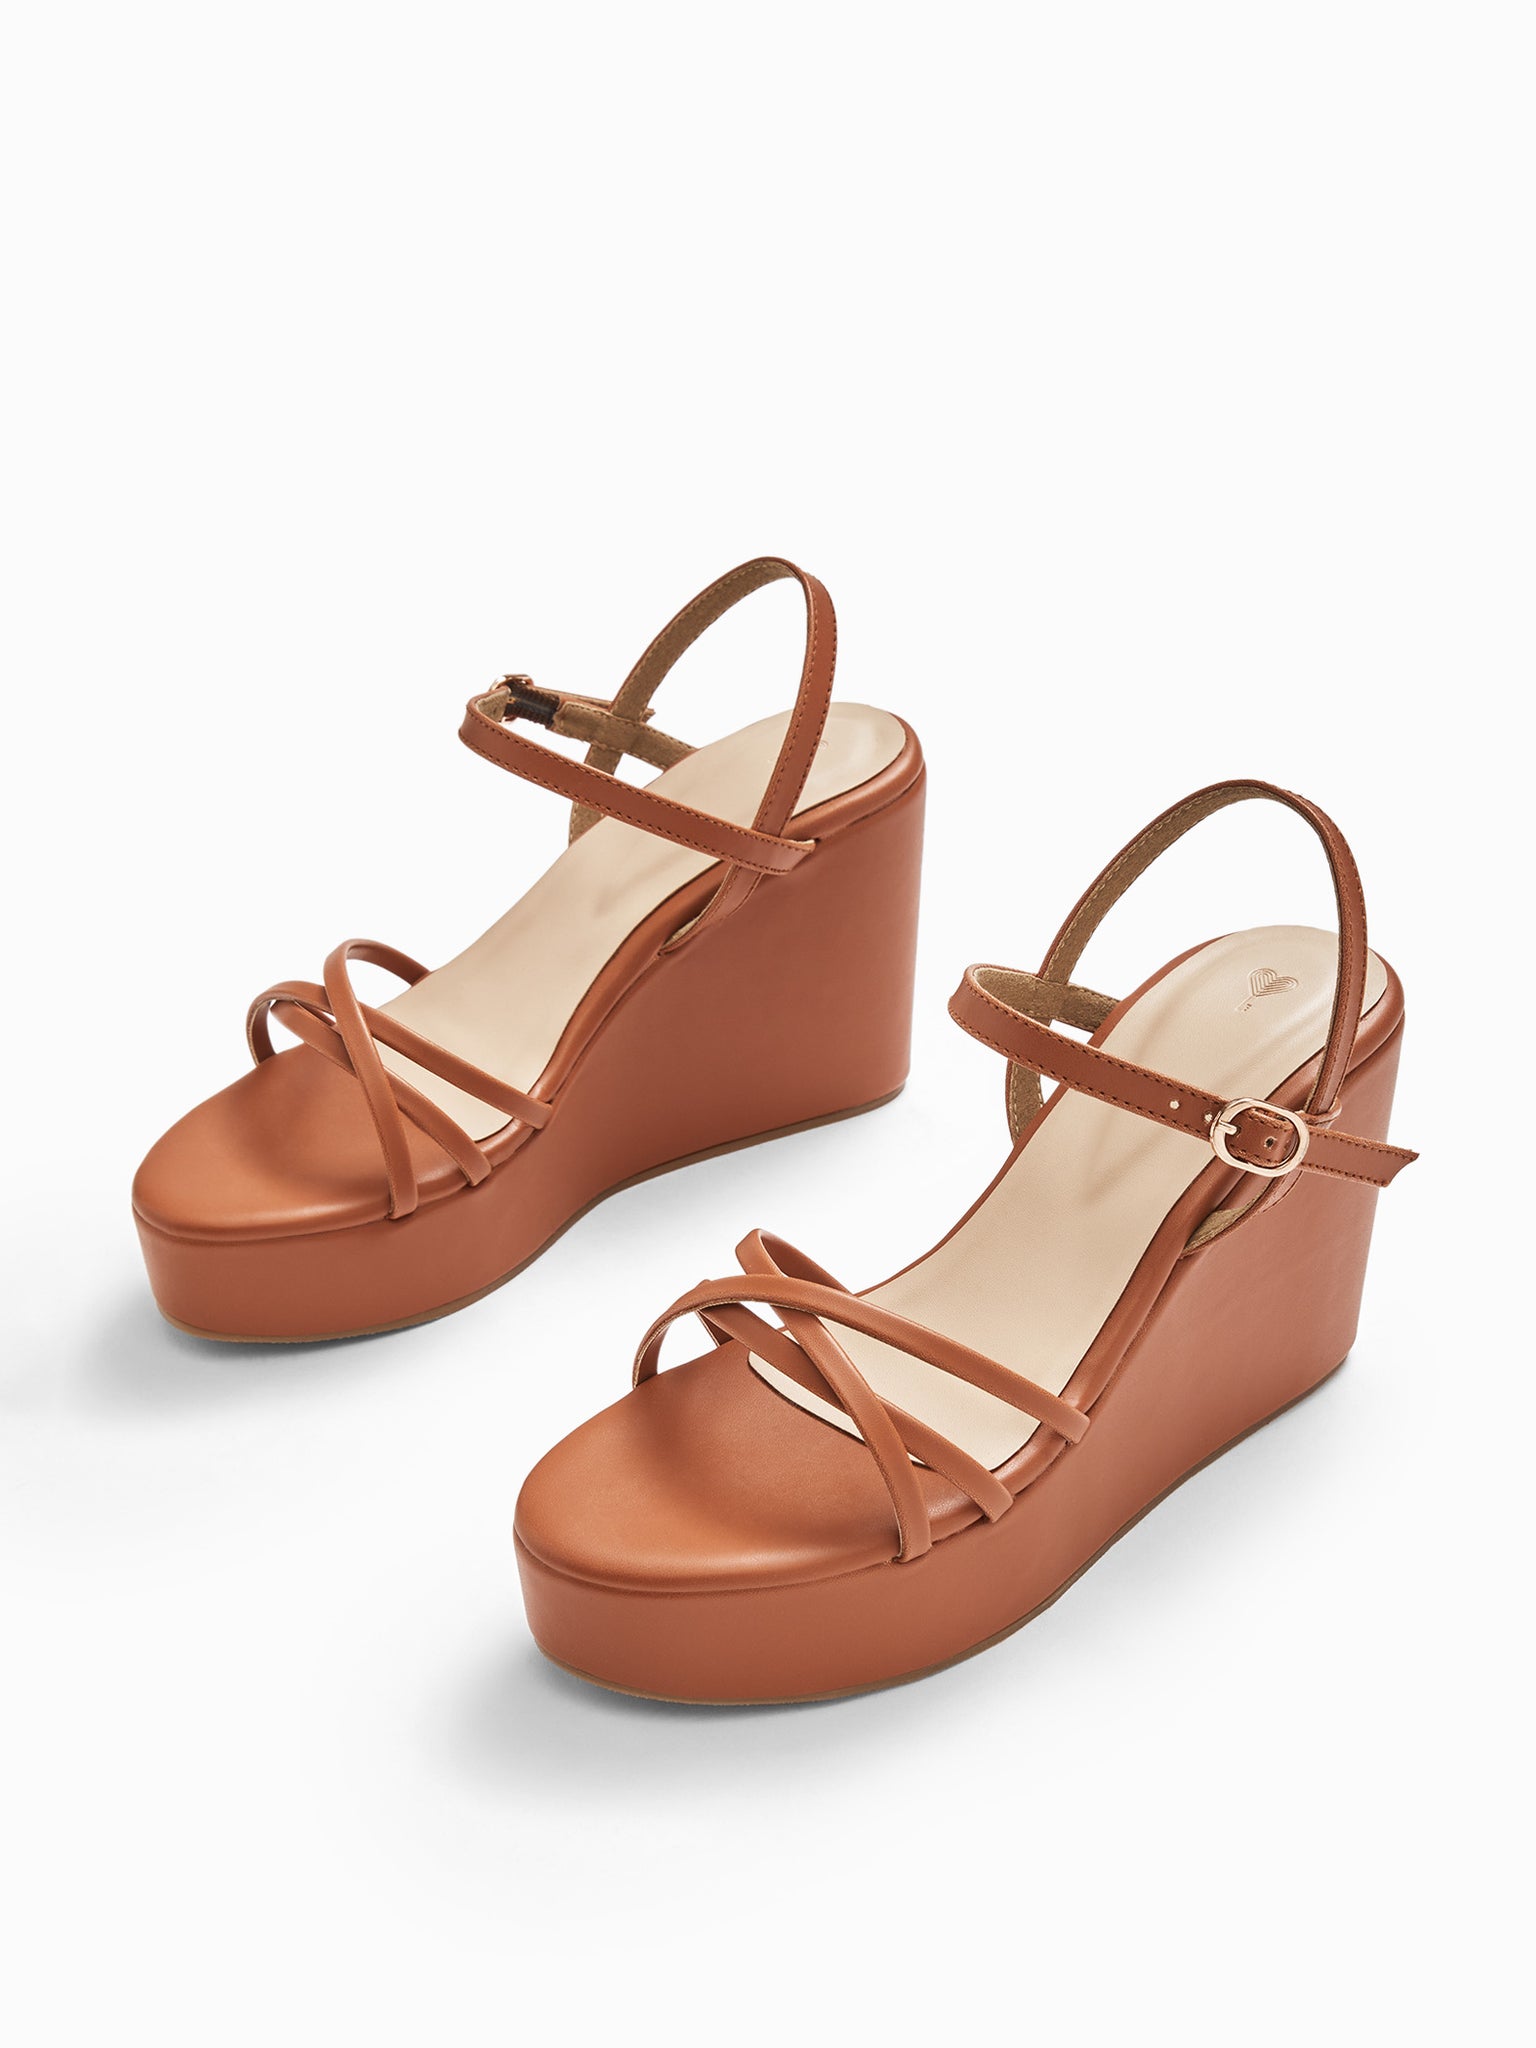 Rust Strappy Peep Toe Wedges